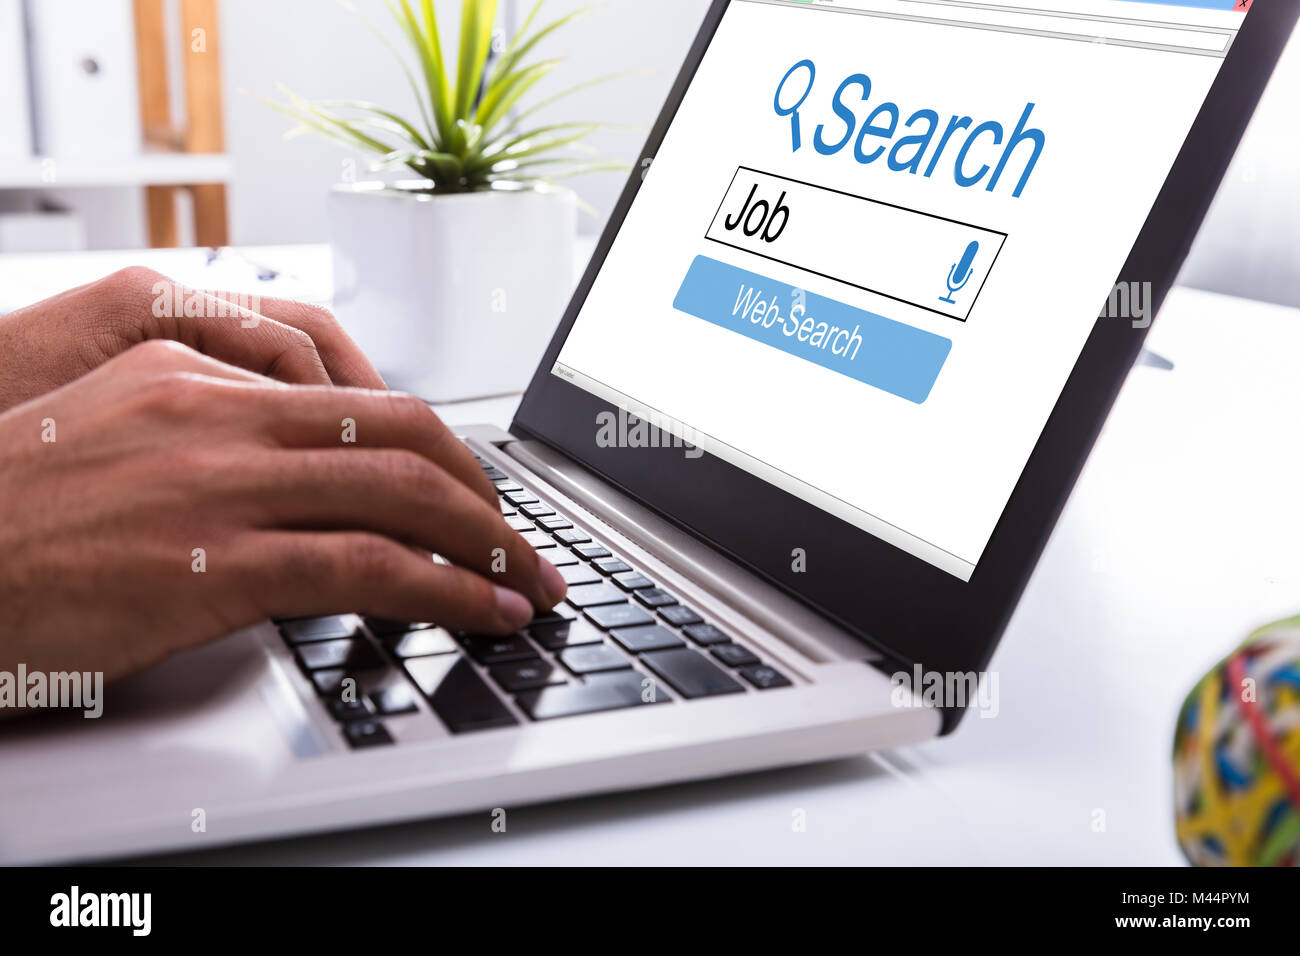 Close-up Of A Businessperson's Hand Searching Online Job On Laptop At Workplace Stock Photo